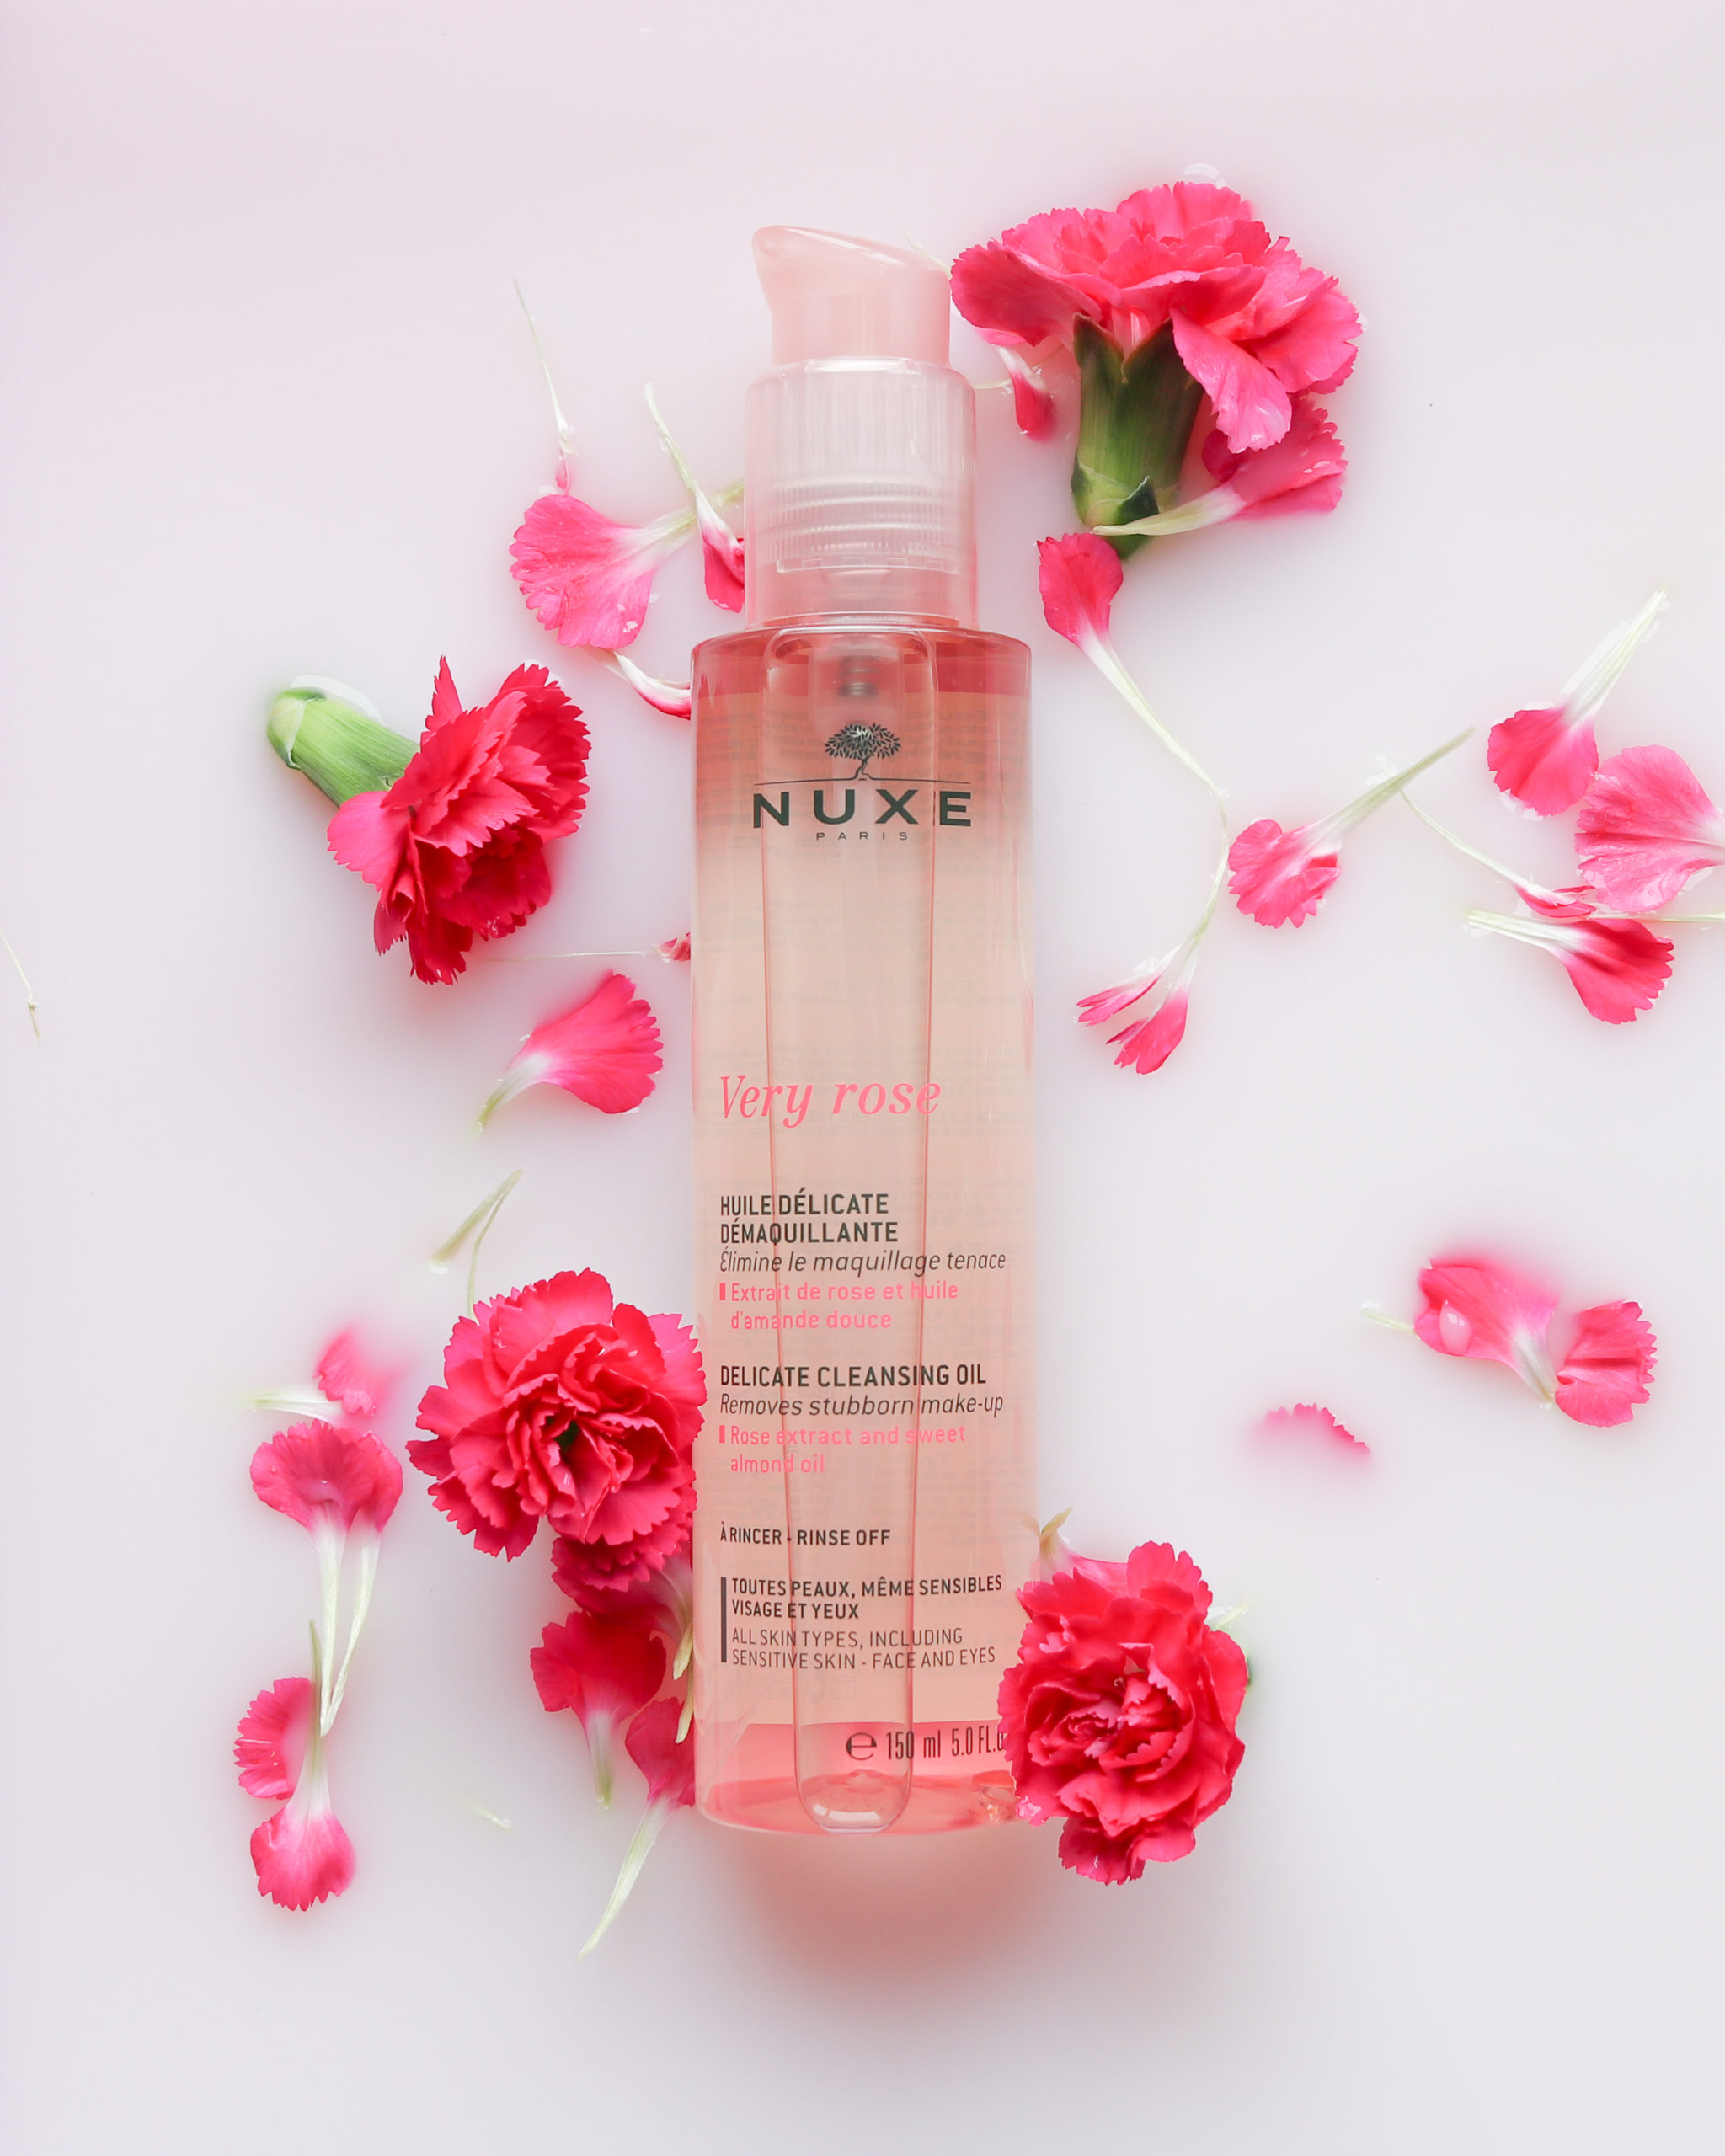 Nuxe Very Rose Cleansing Oil